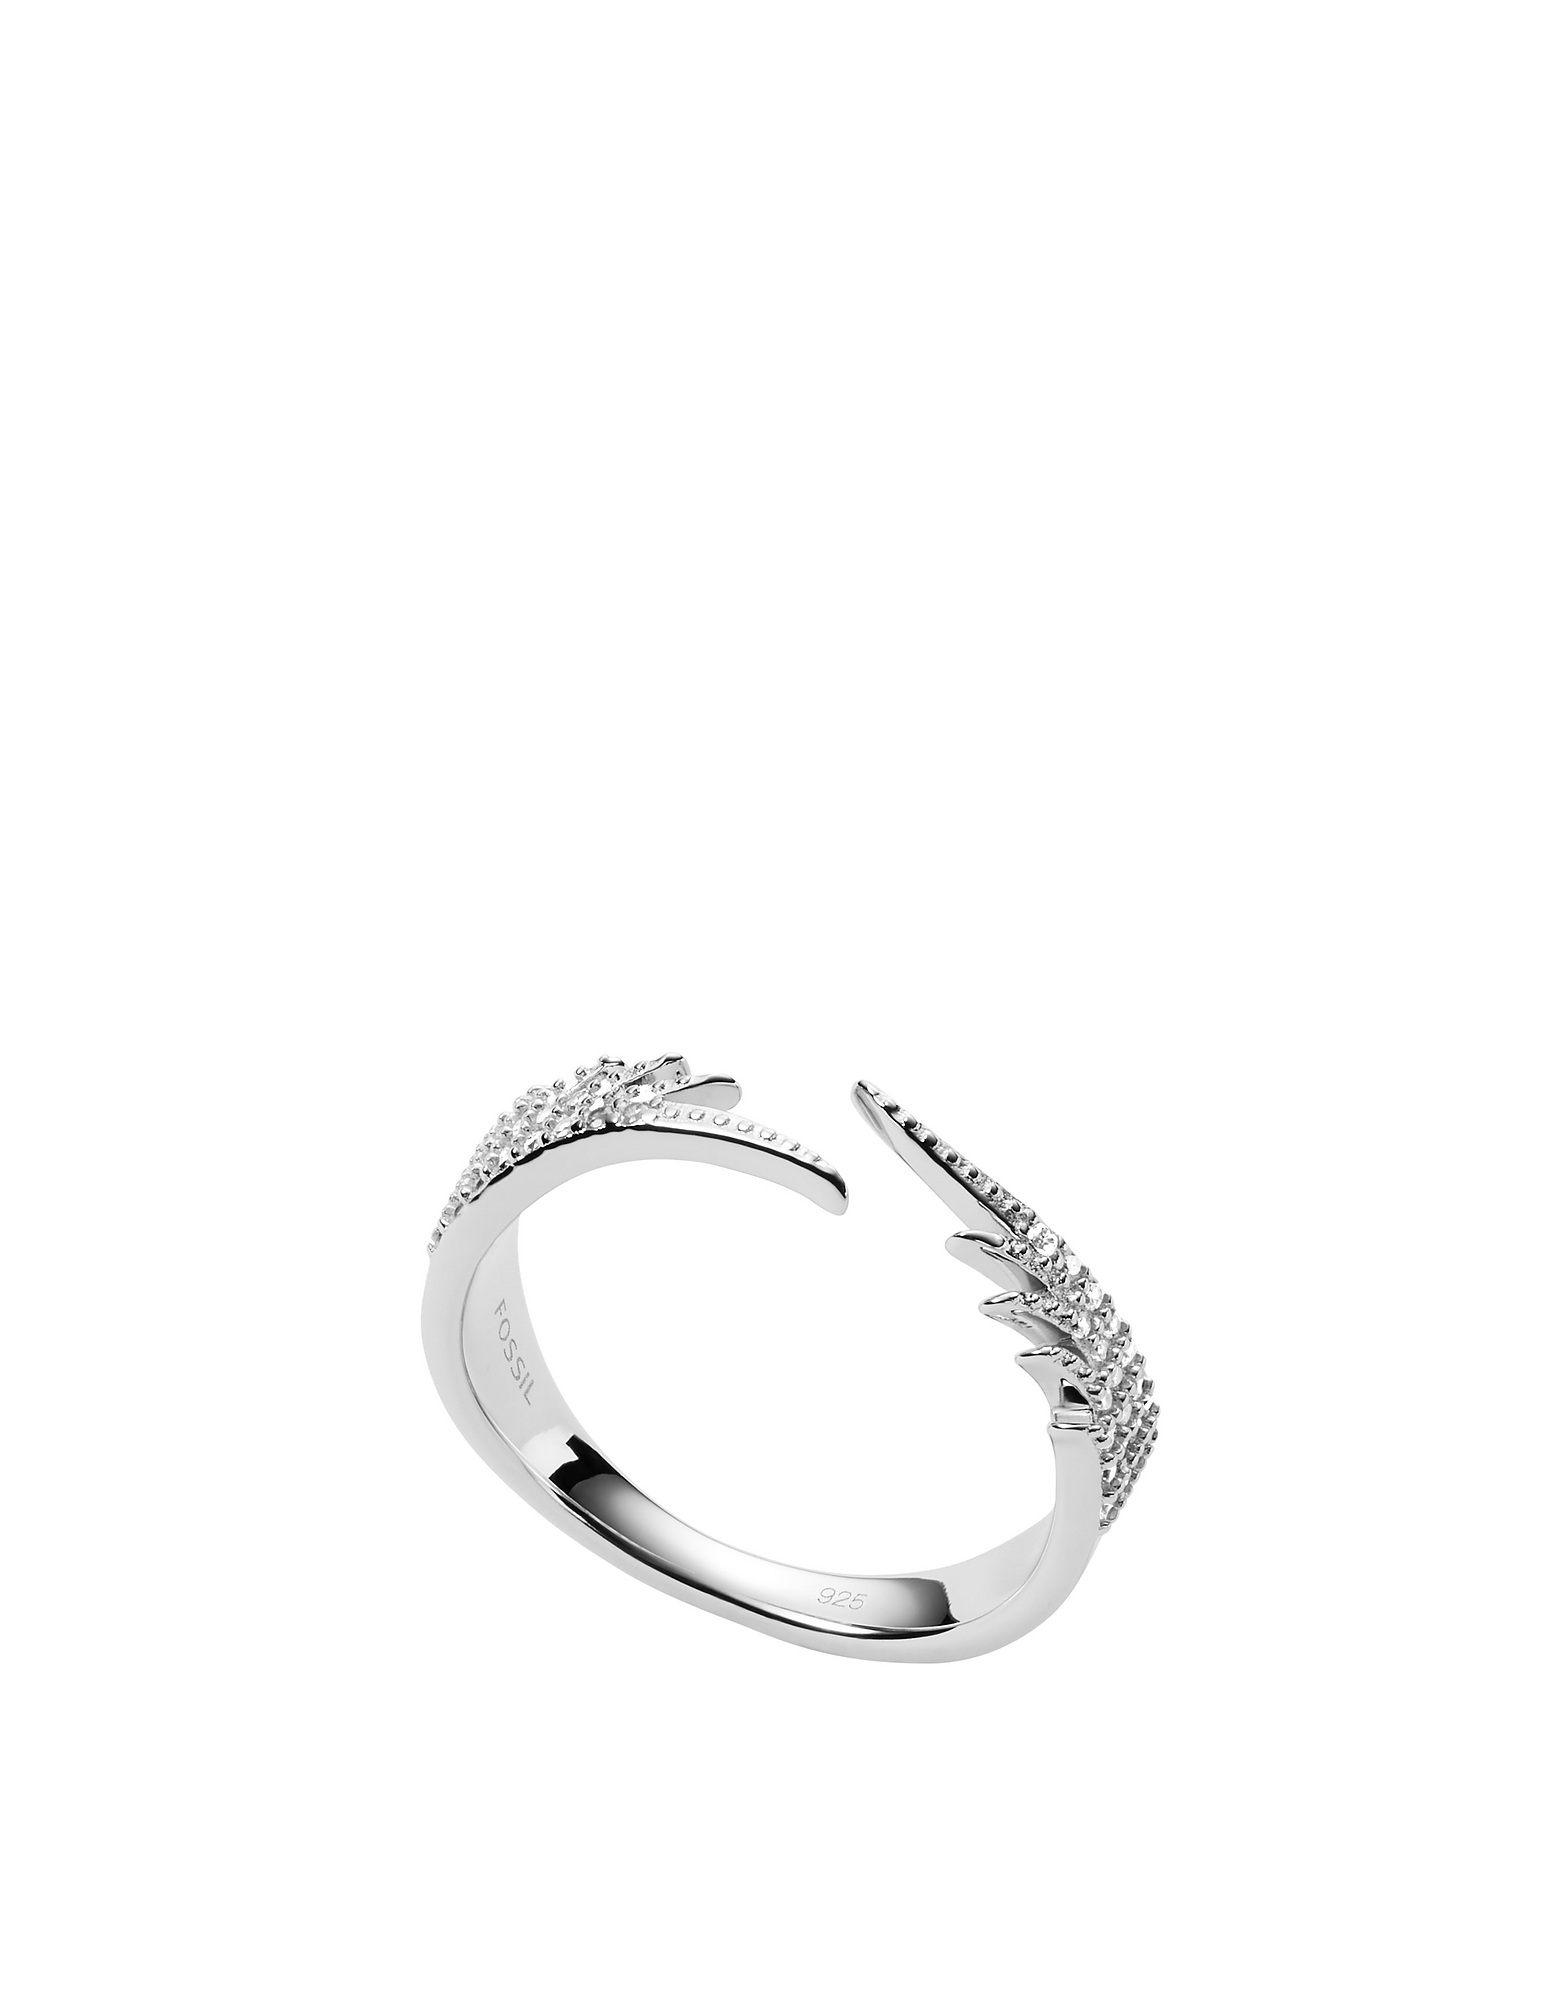 Fossil Rings Sterling Silver 925 Sterling Silver Women's Ring